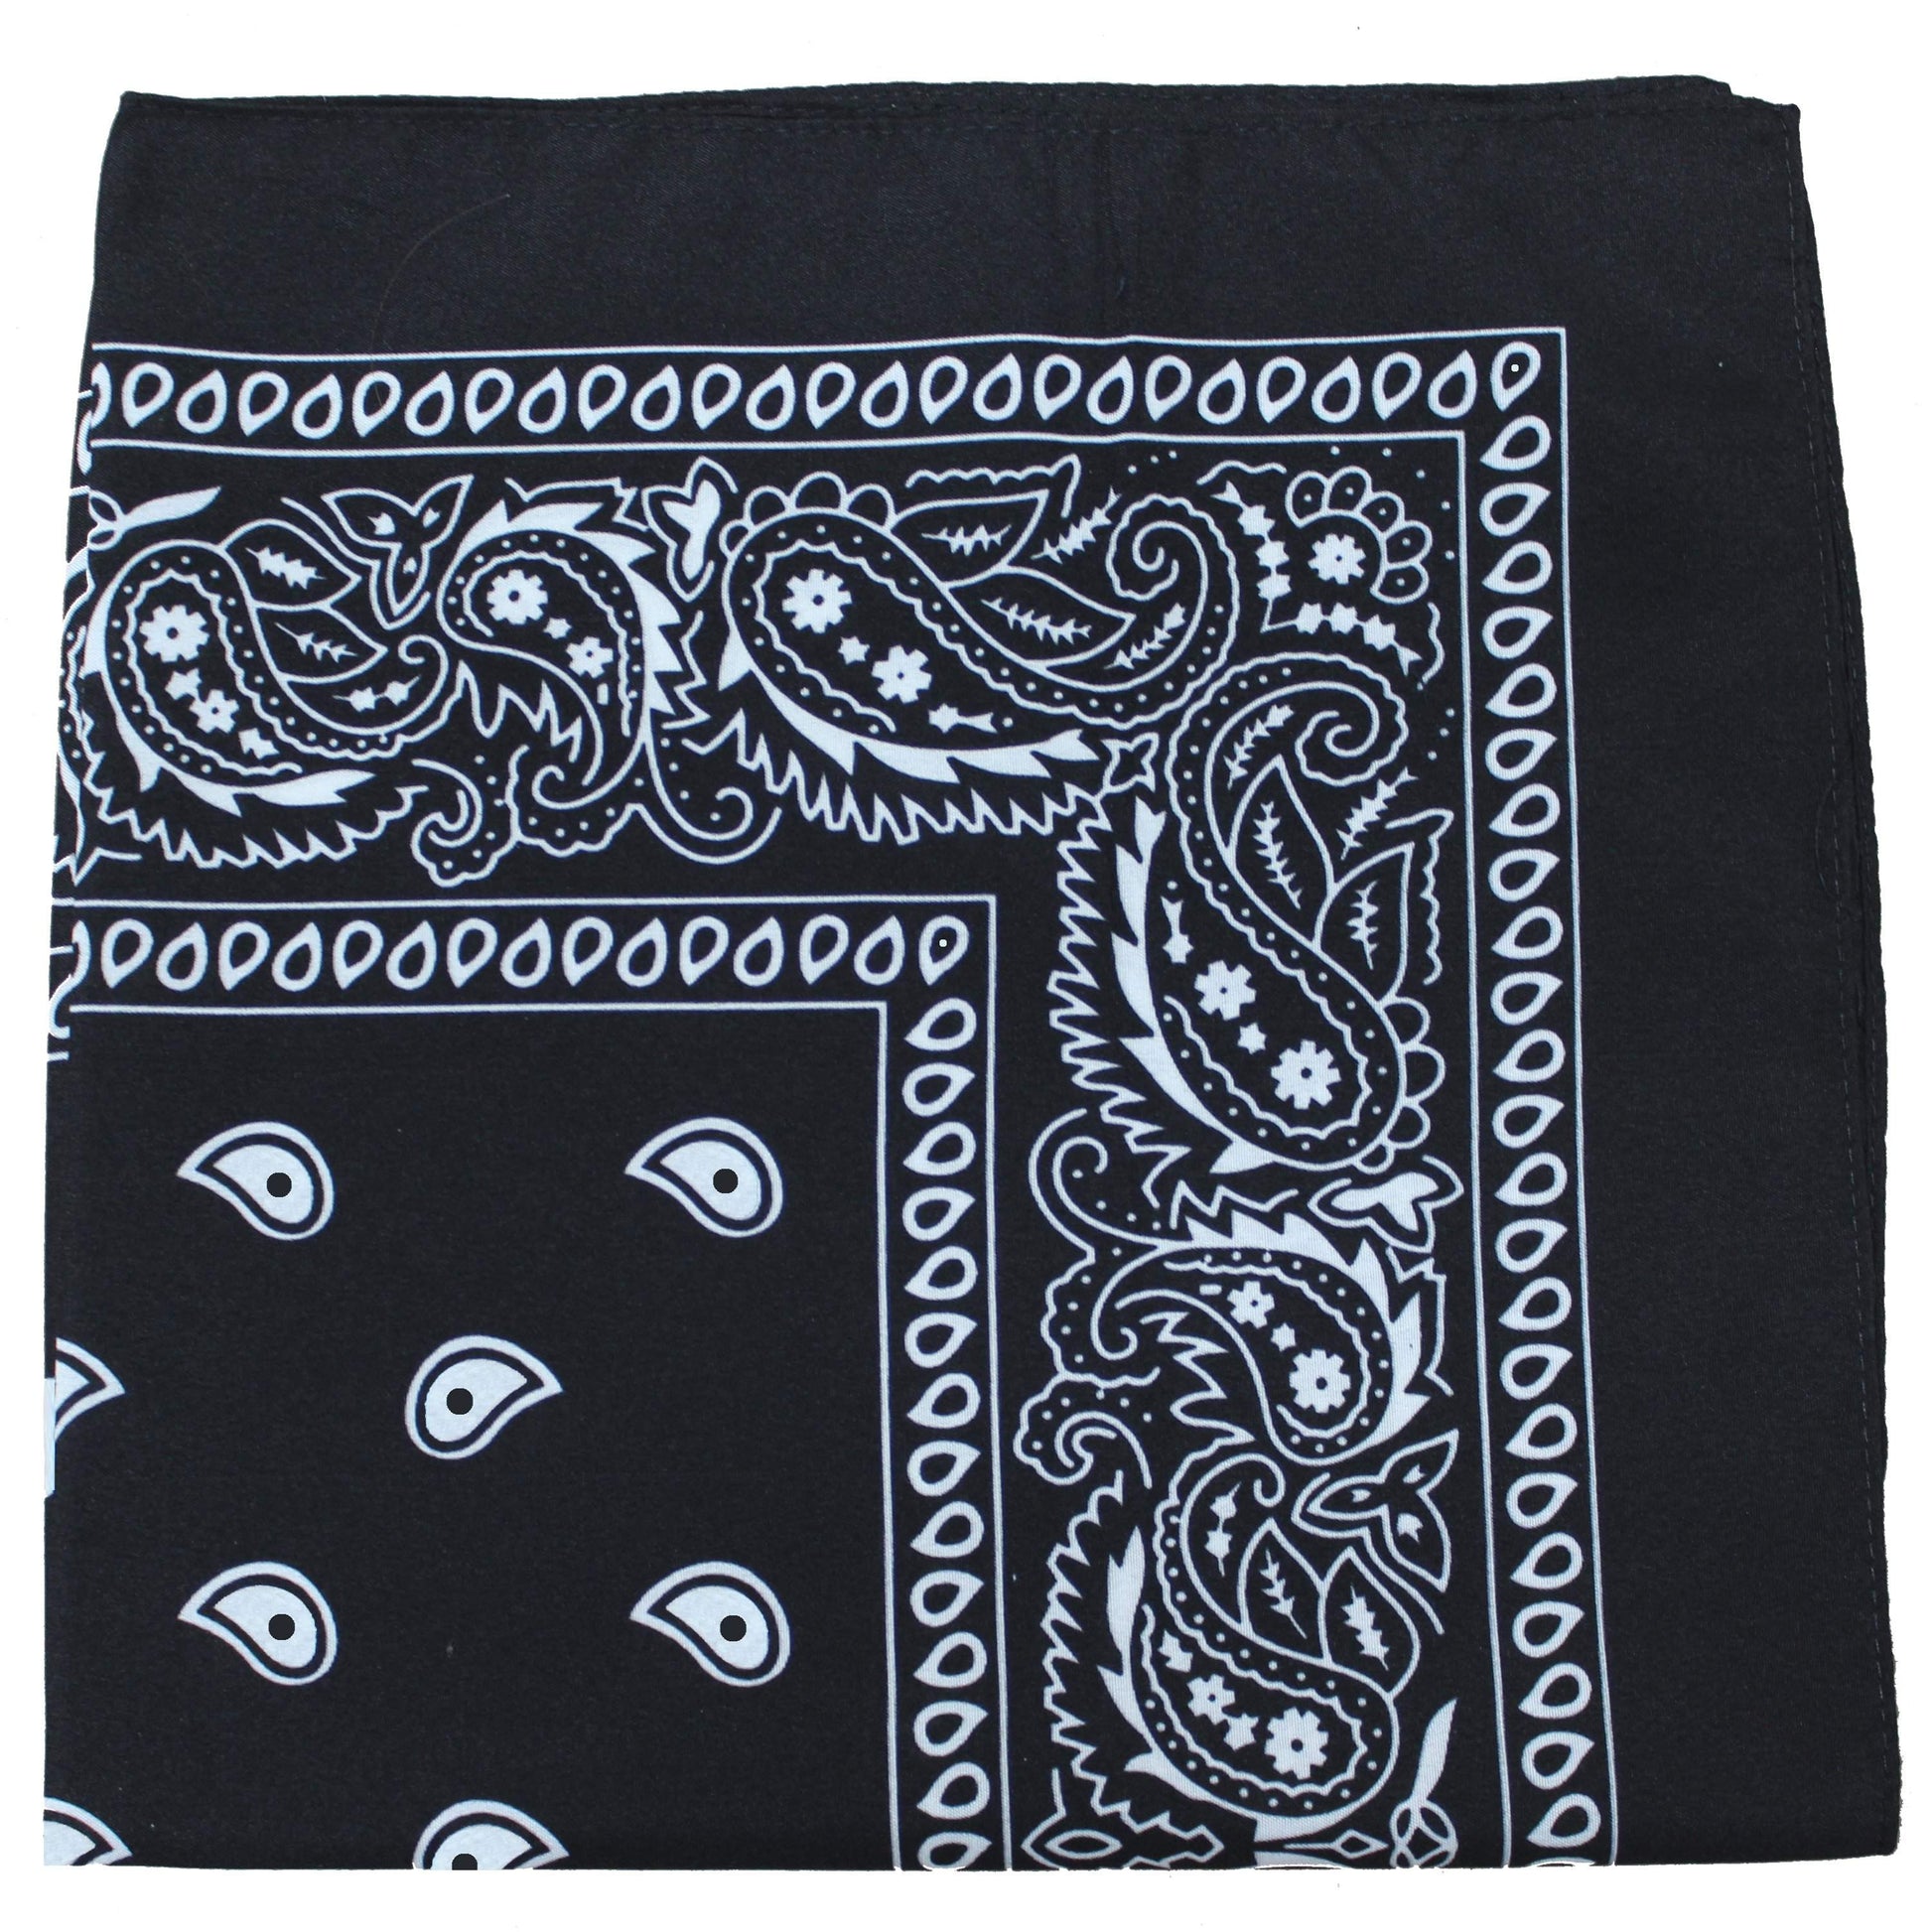 Mechaly Kerchiefs Cotton 22 x 22 In Headband - Paisley and Solid Colors